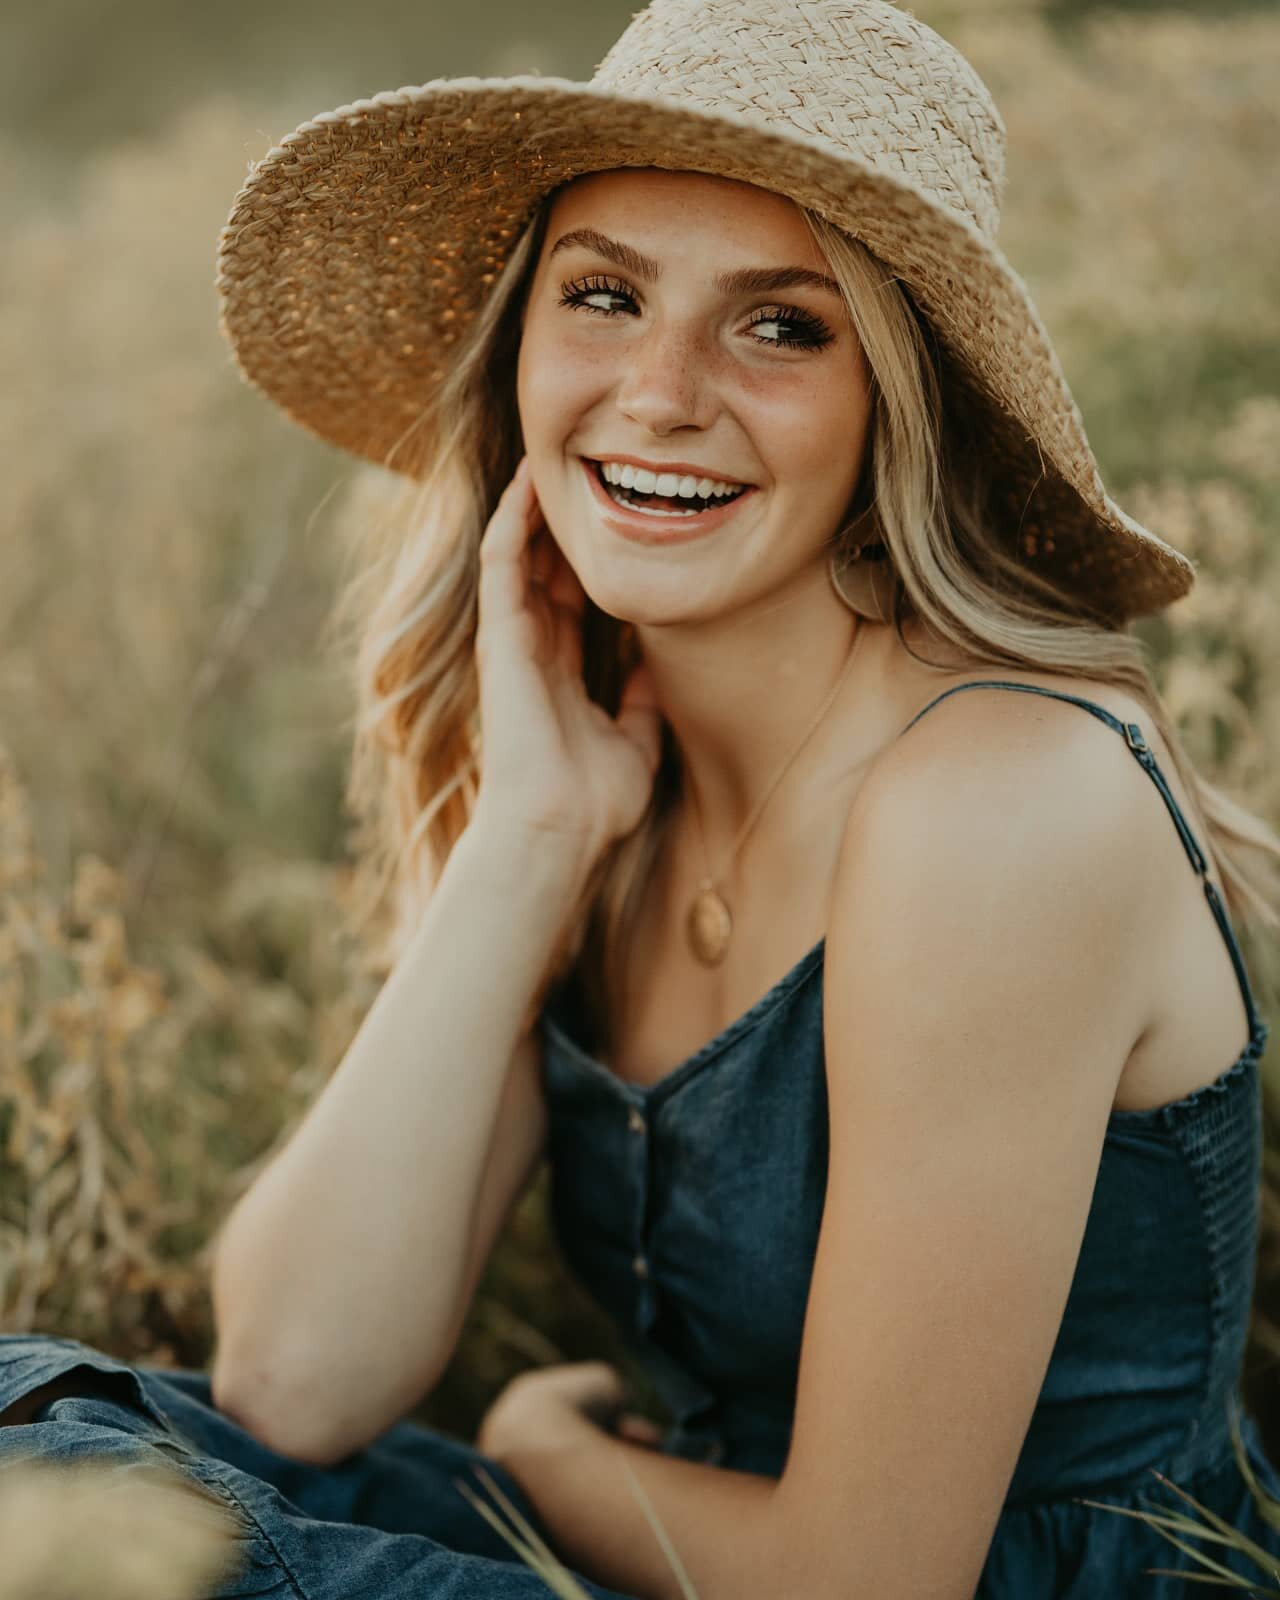 We know its freezing outside, but we're thinkin' of warmer summer days with our class of 2022!⠀
⠀
Senior bookings will open in April, but if you reach out before then, you'll get first dibs on our dates.⠀
⠀
Summer spots always fill up fast, so let's 